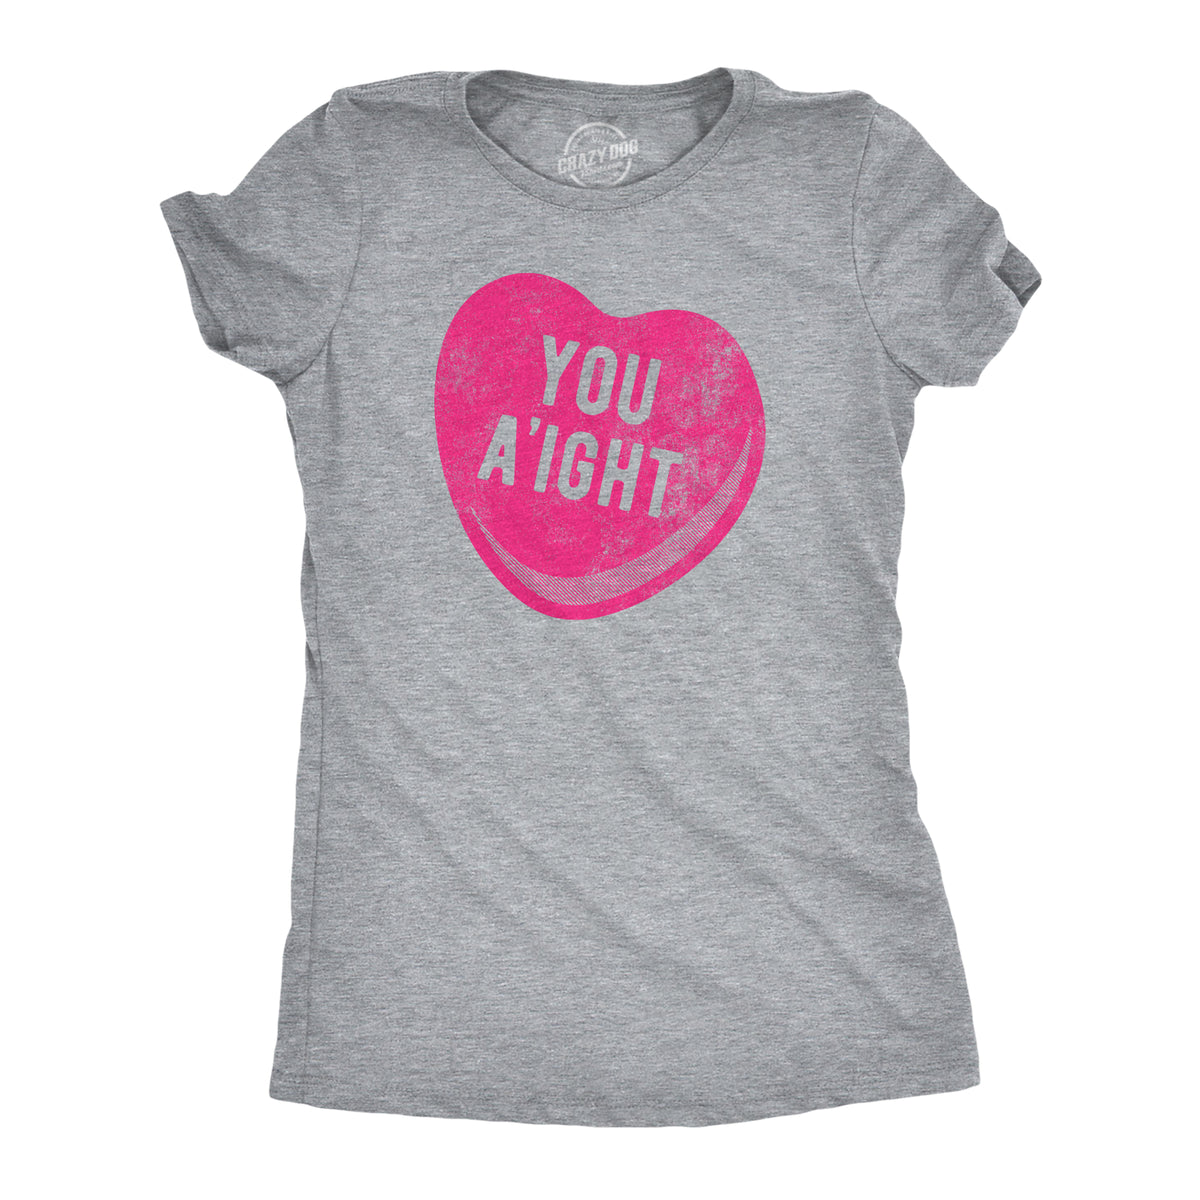 Funny Light Heather Grey - You Aight You Aight Womens T Shirt Nerdy Valentine&#39;s Day Sarcastic Tee